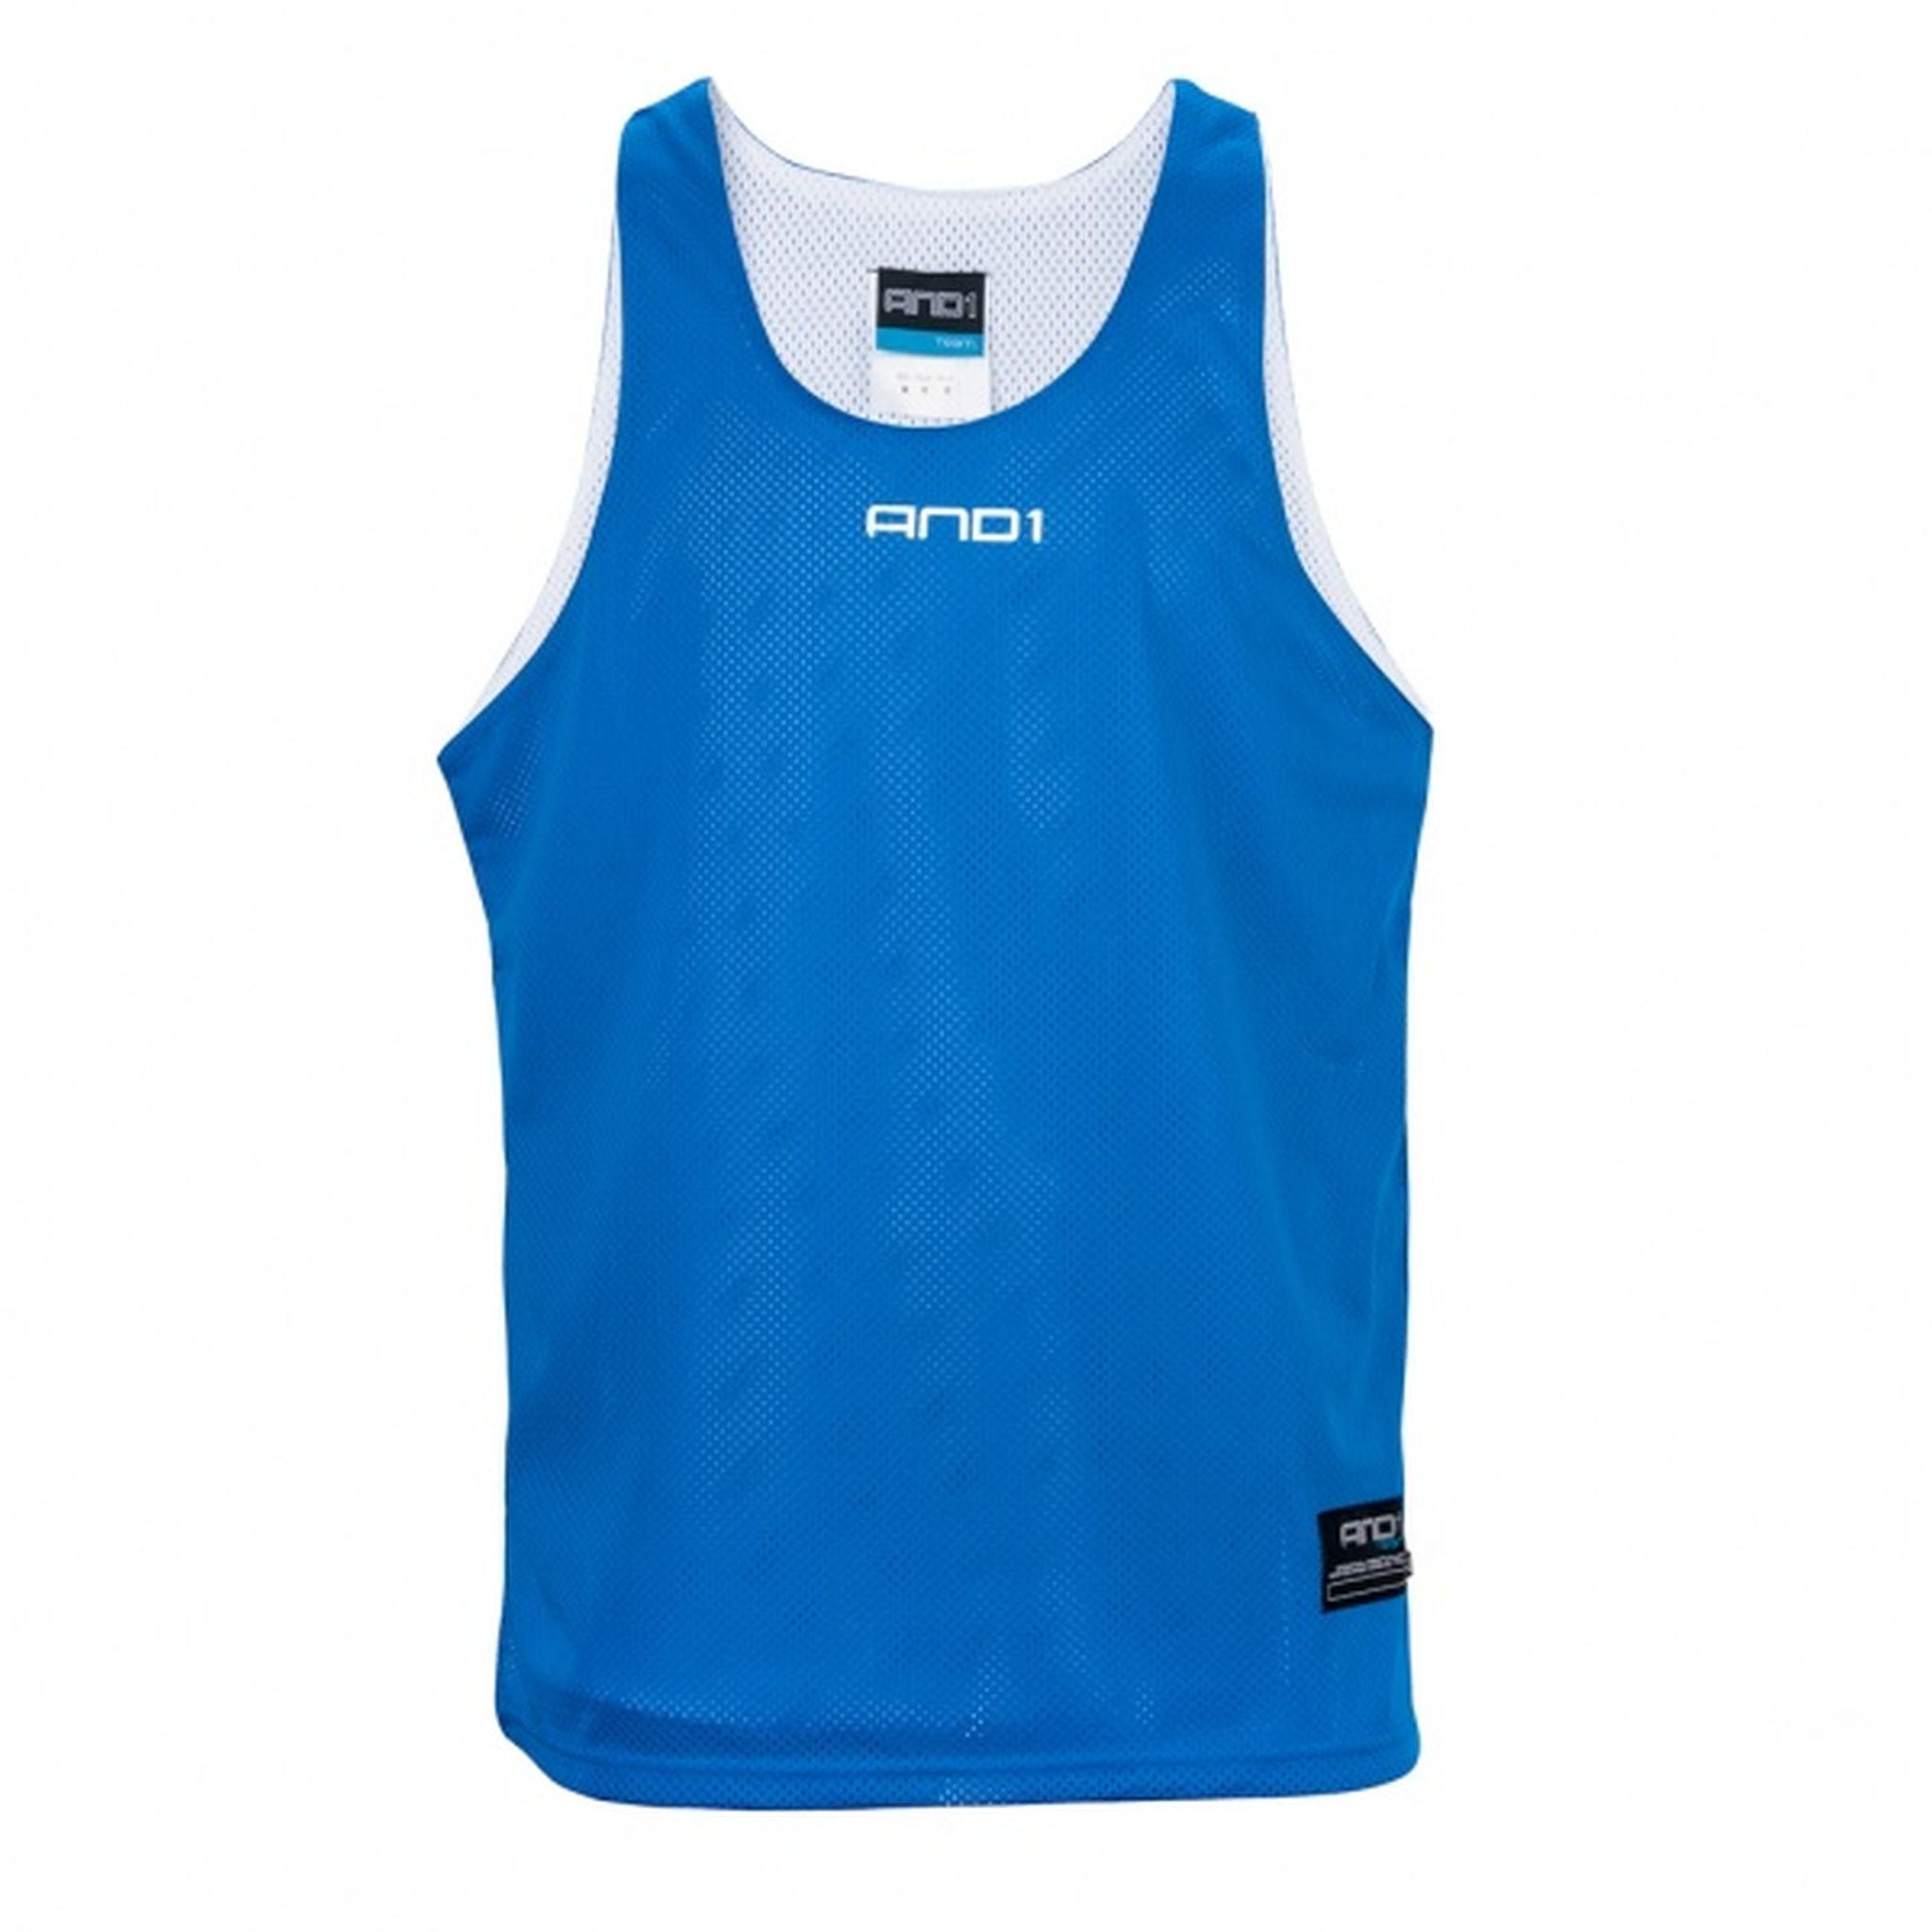 And1 Reversible Basketball Singlet